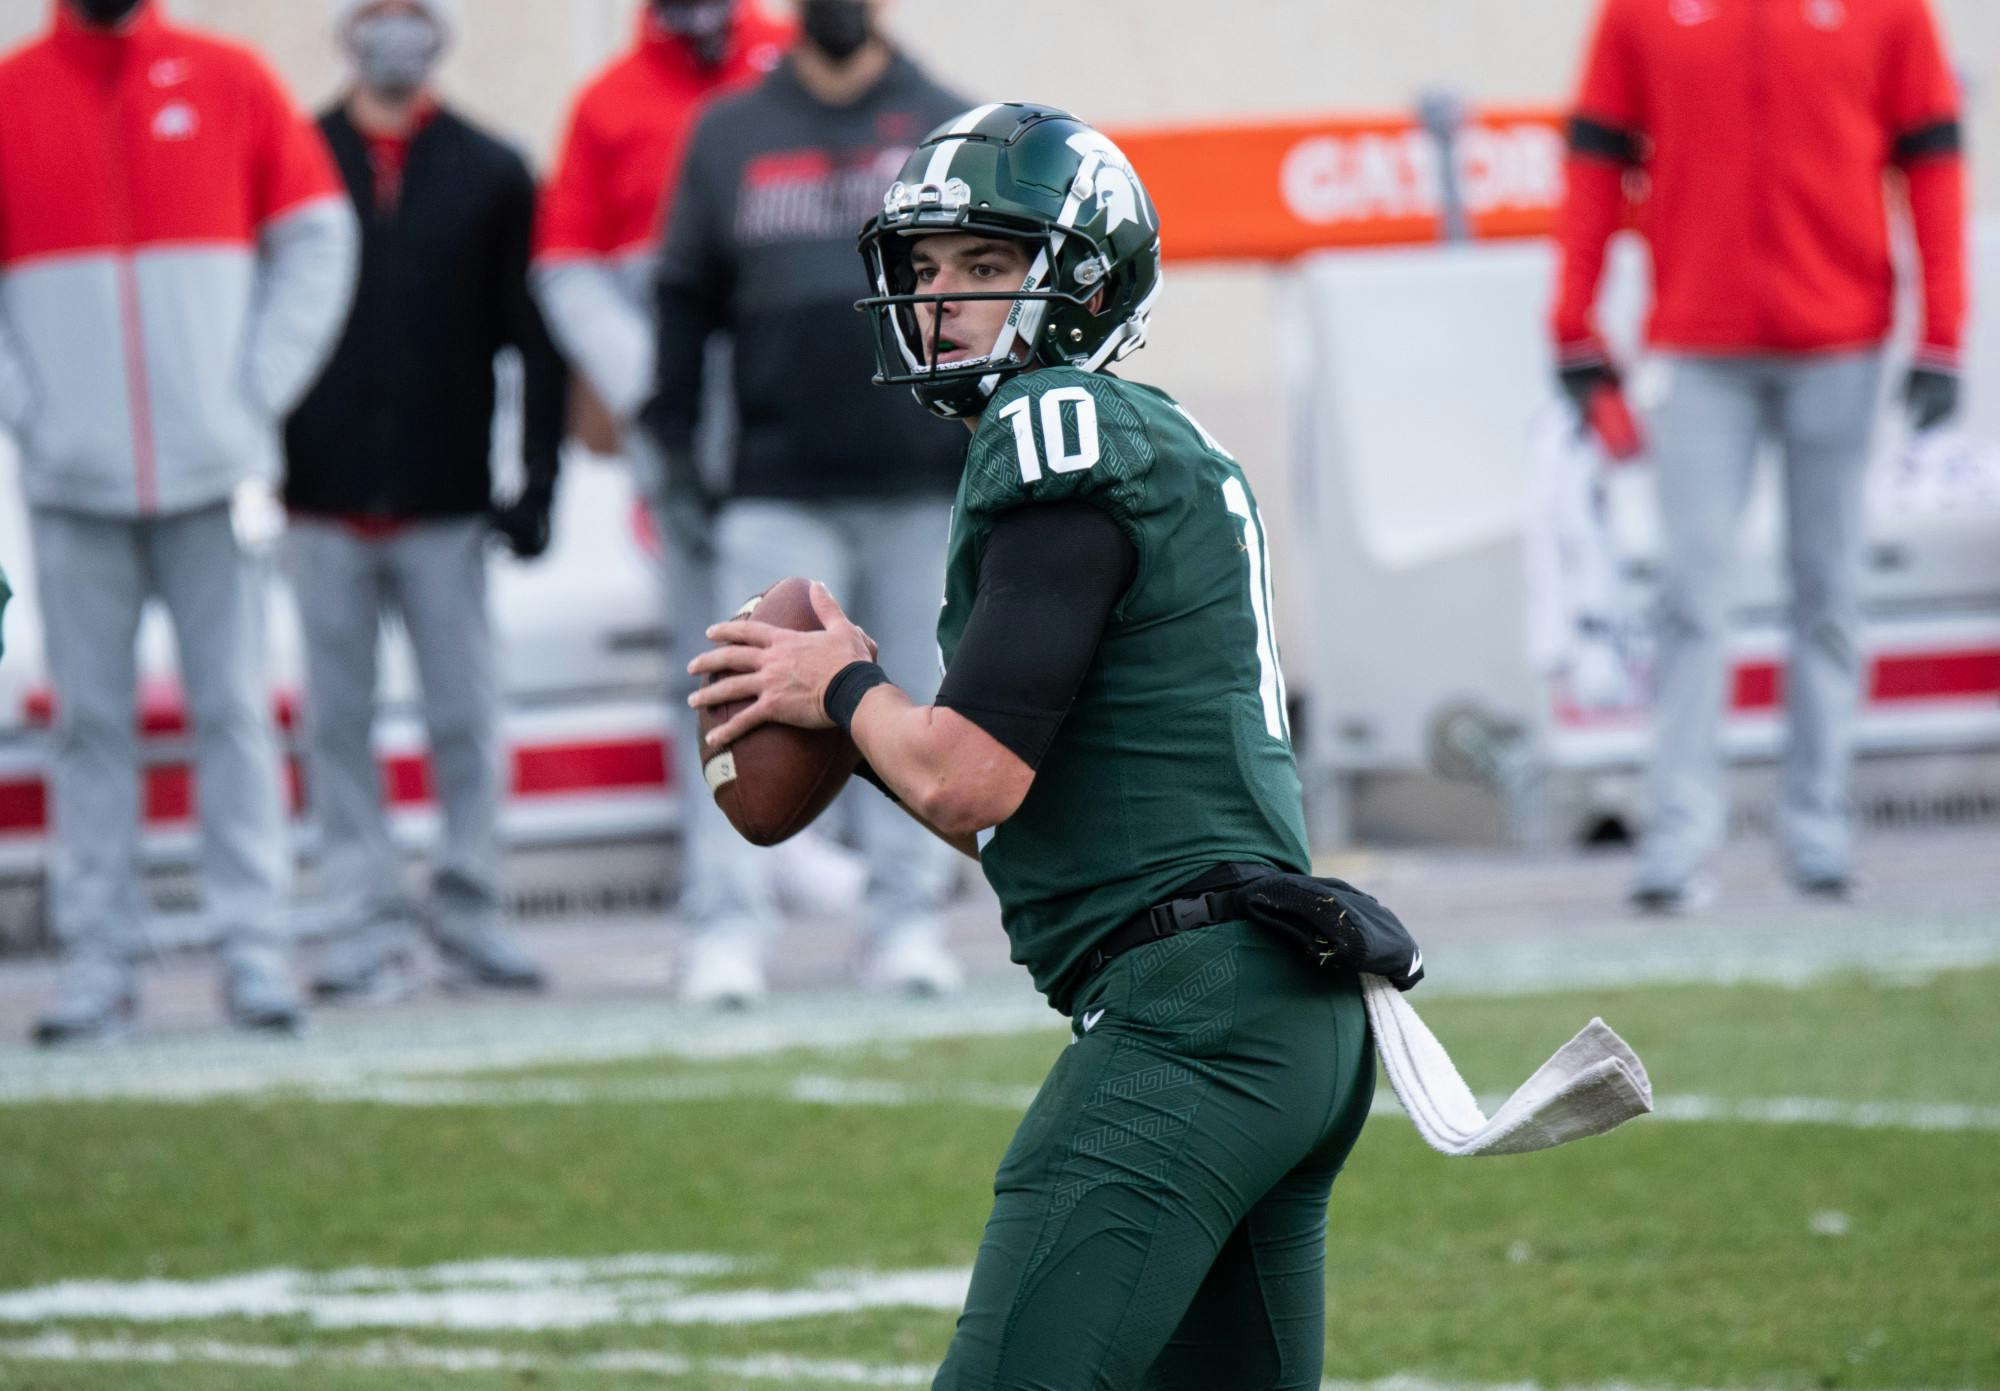 MSU's quarterback Payton Thorne, from Naperville, IL, looks downfield in a game against OSU on Dec. 5, 2020.